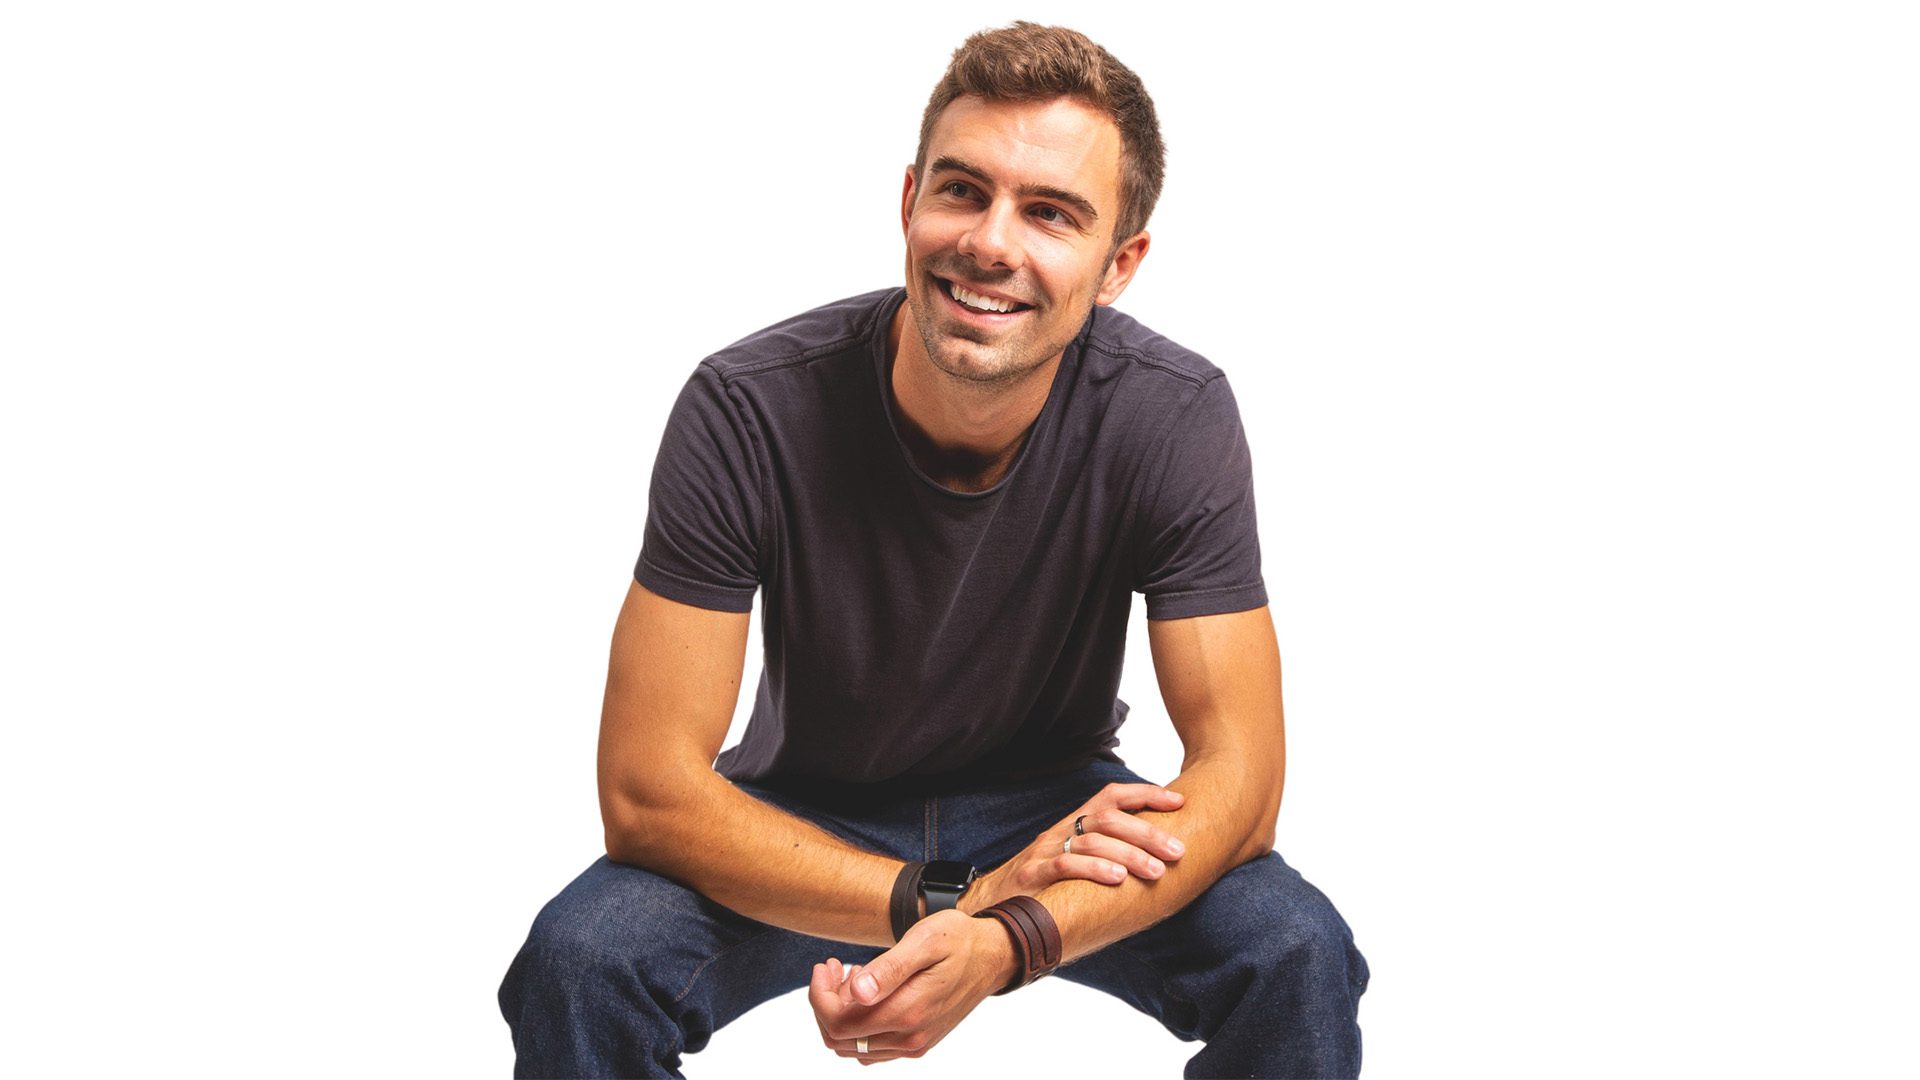 Kevin Martin, the co-founder of sustainable jeans company unspun